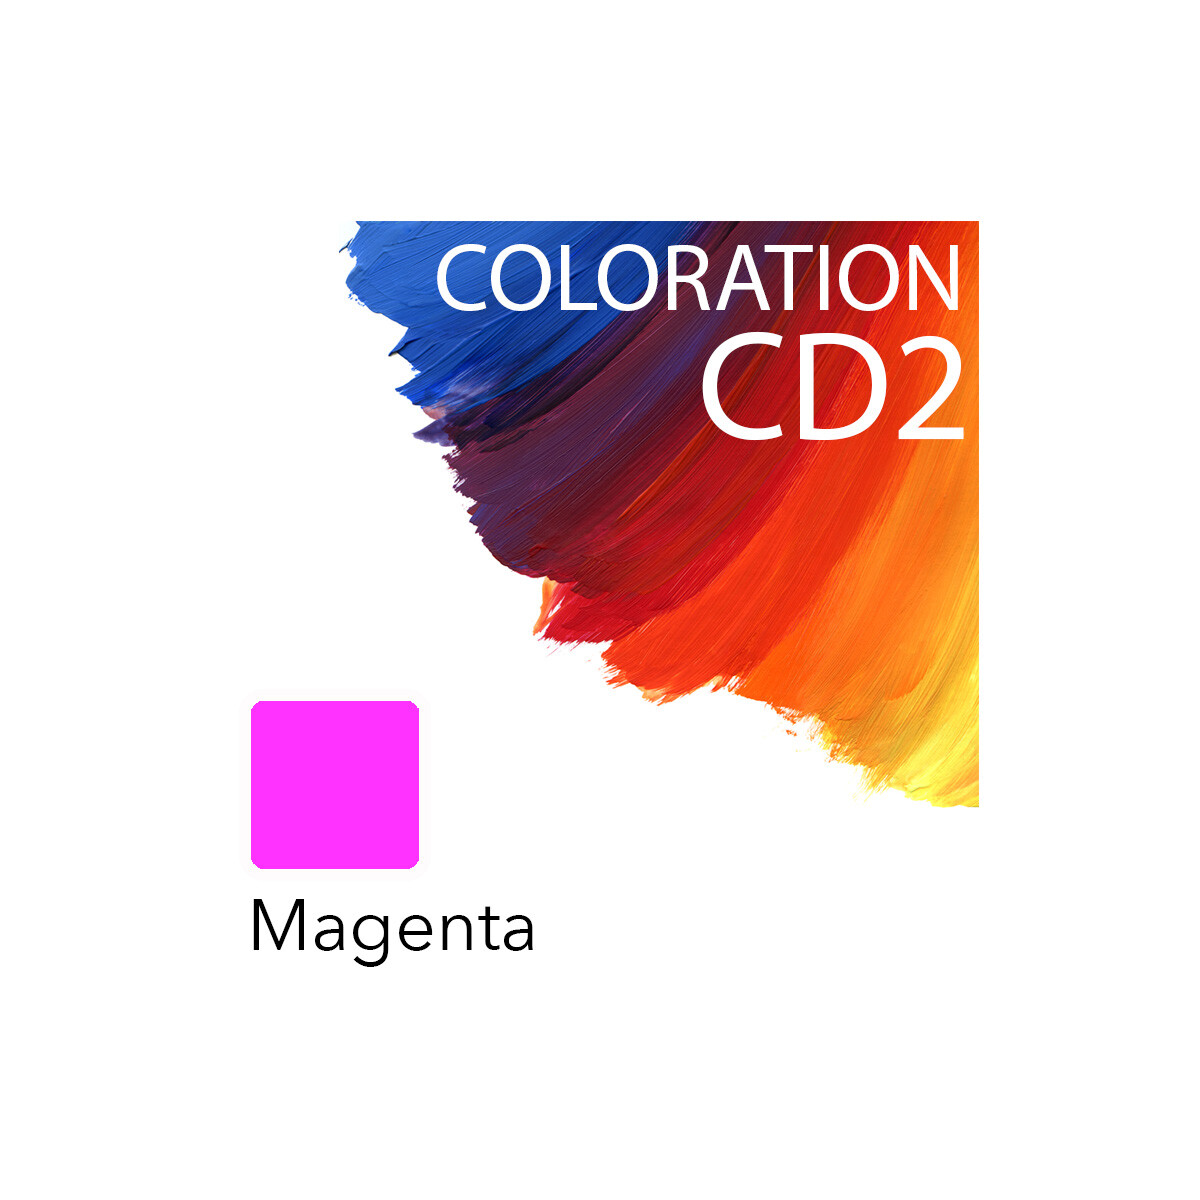 Coloration CD2 Flasche Magenta